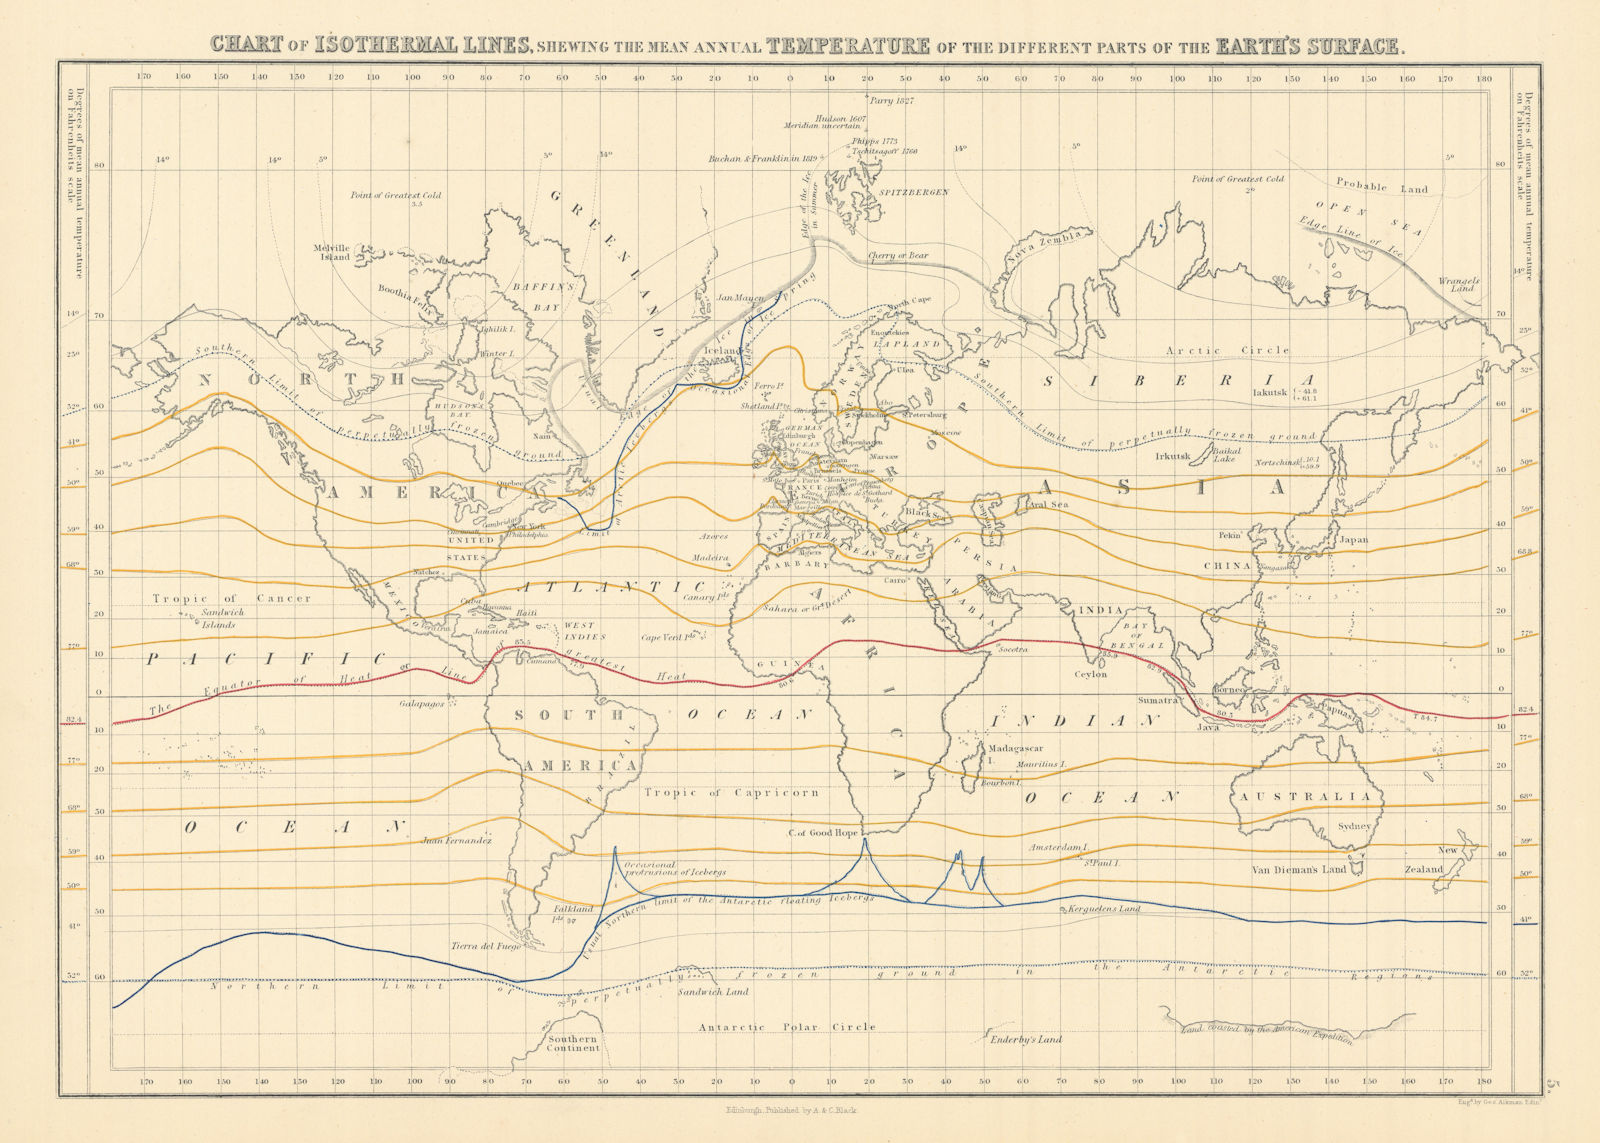 World chart of isothermal lines. Mean annual temperature. GEORGE AIKMAN 1862 map